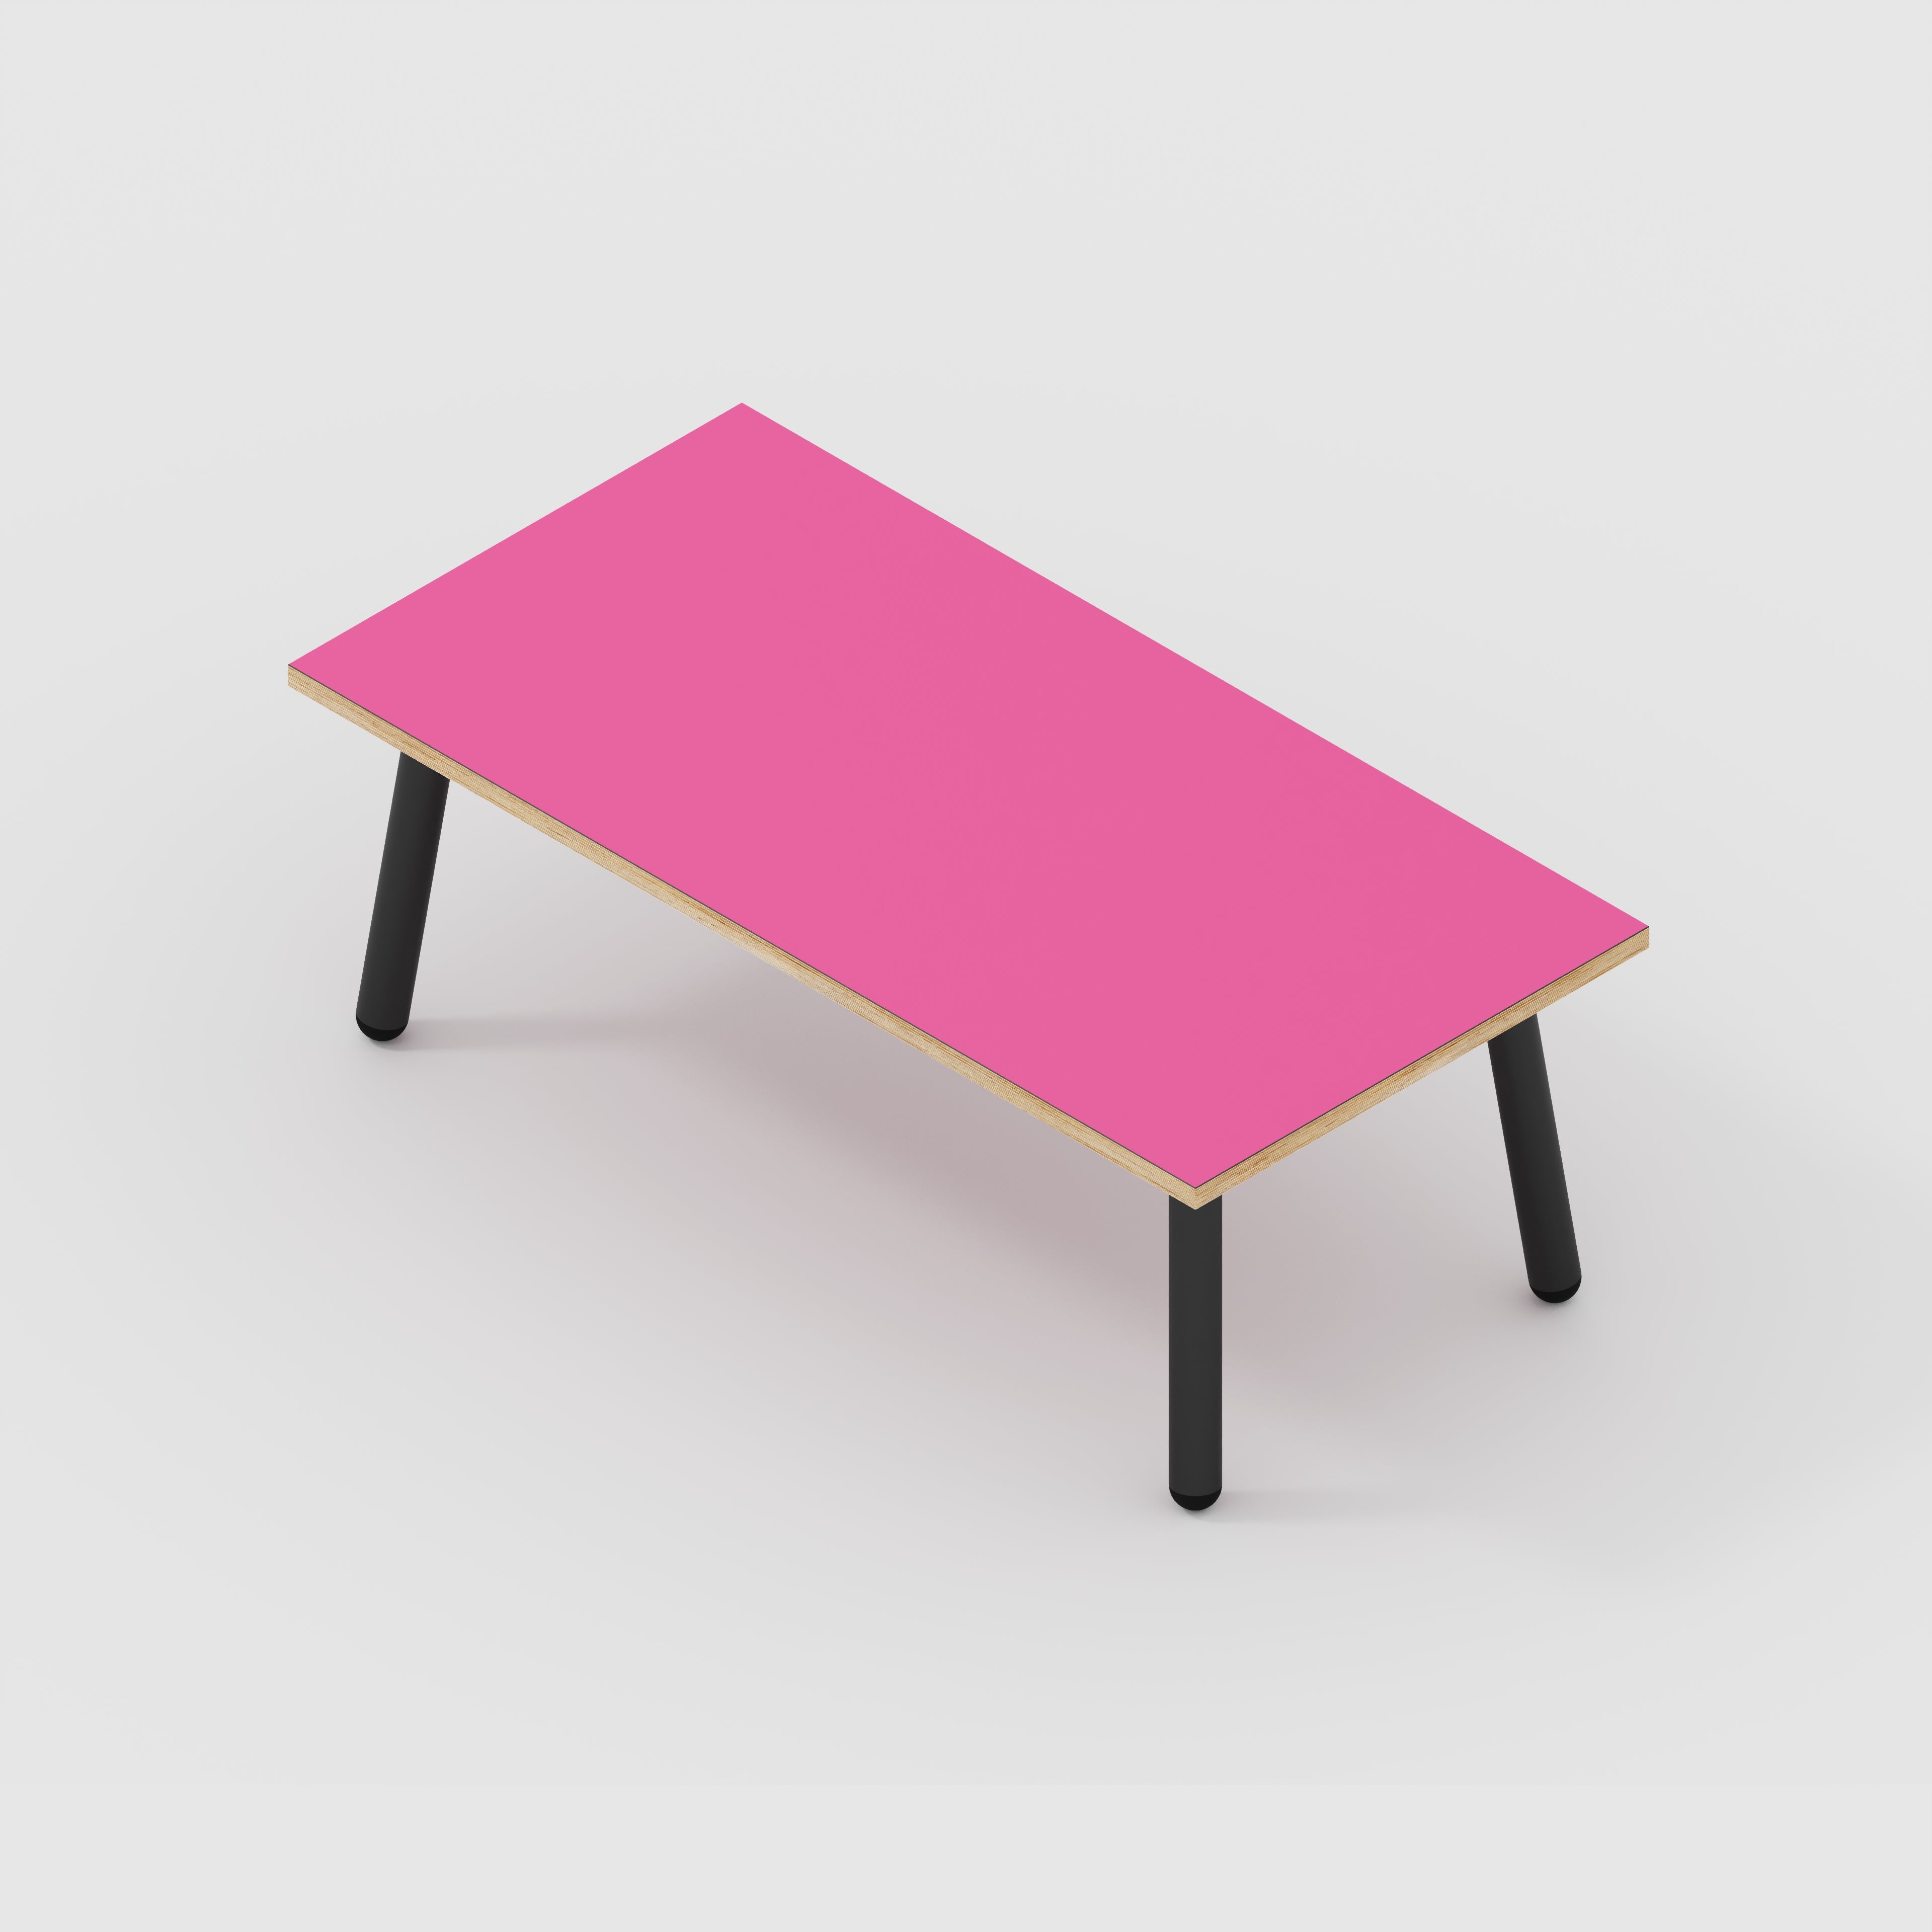 Coffee Table with Black Round Single Pin Legs - Formica Juicy Pink - 1200(w) x 600(d) x 425(h)